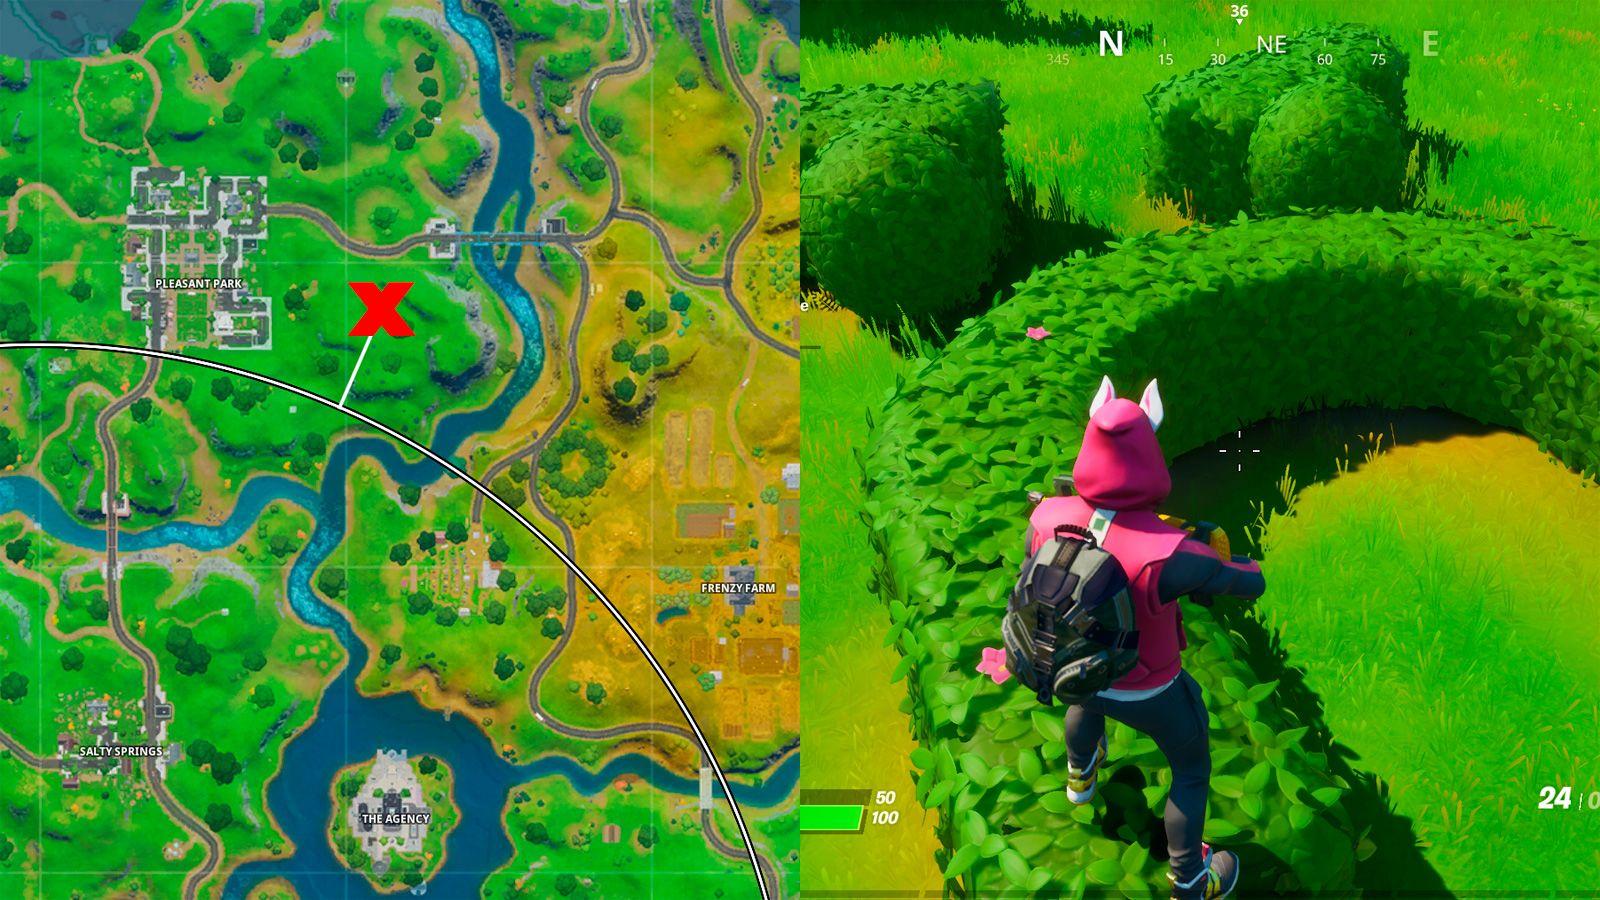 Map spot and location of Grumpy Green in Fortnite.